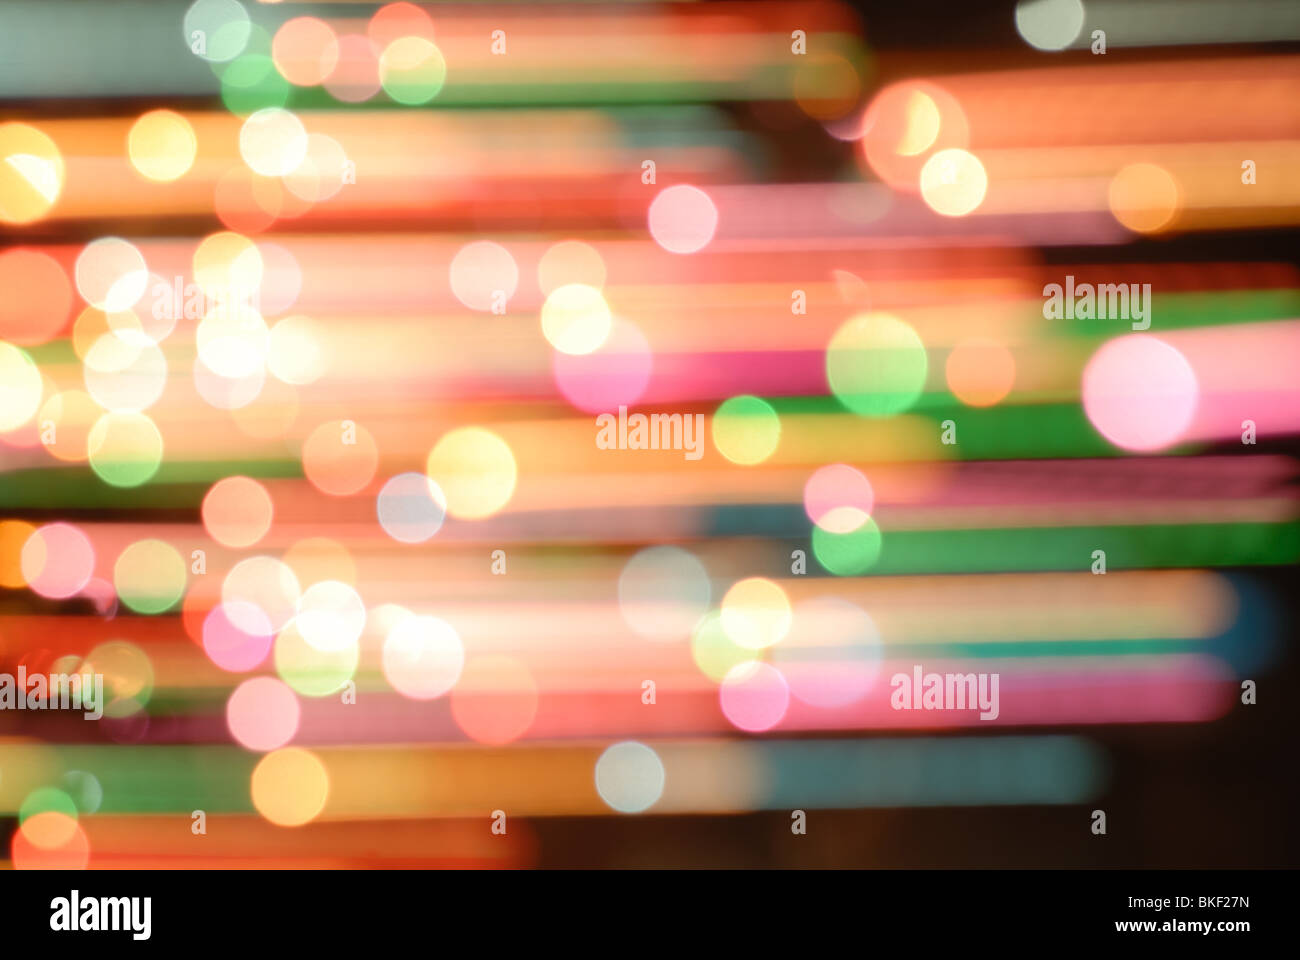 abstract light background Stock Photo